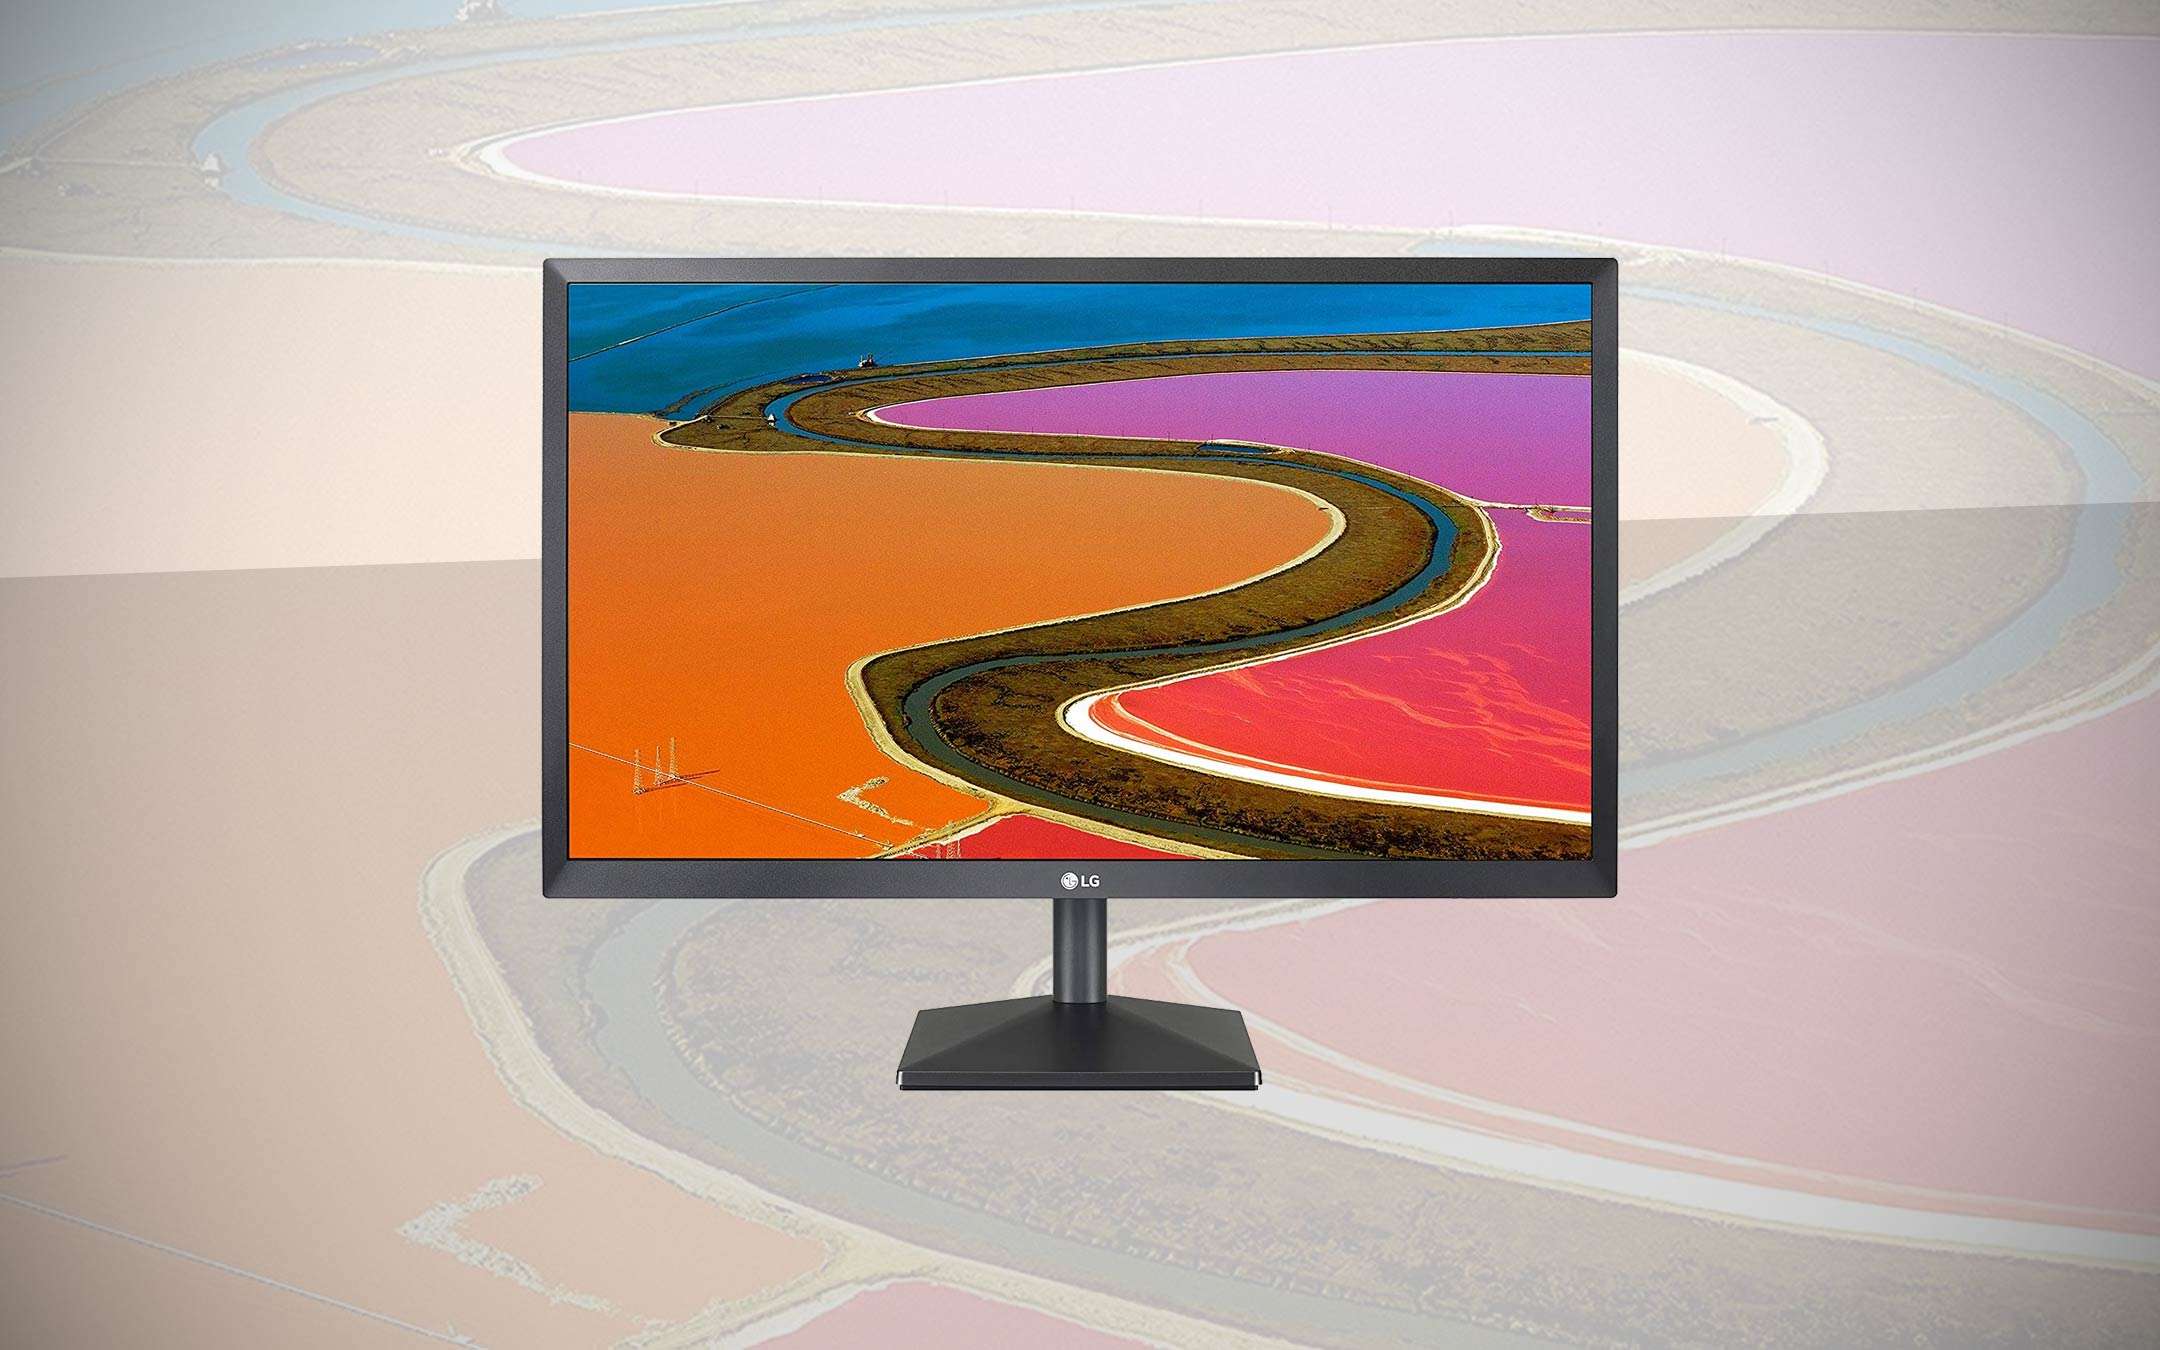 LG 21.5 ”monitor on time offer on Amazon